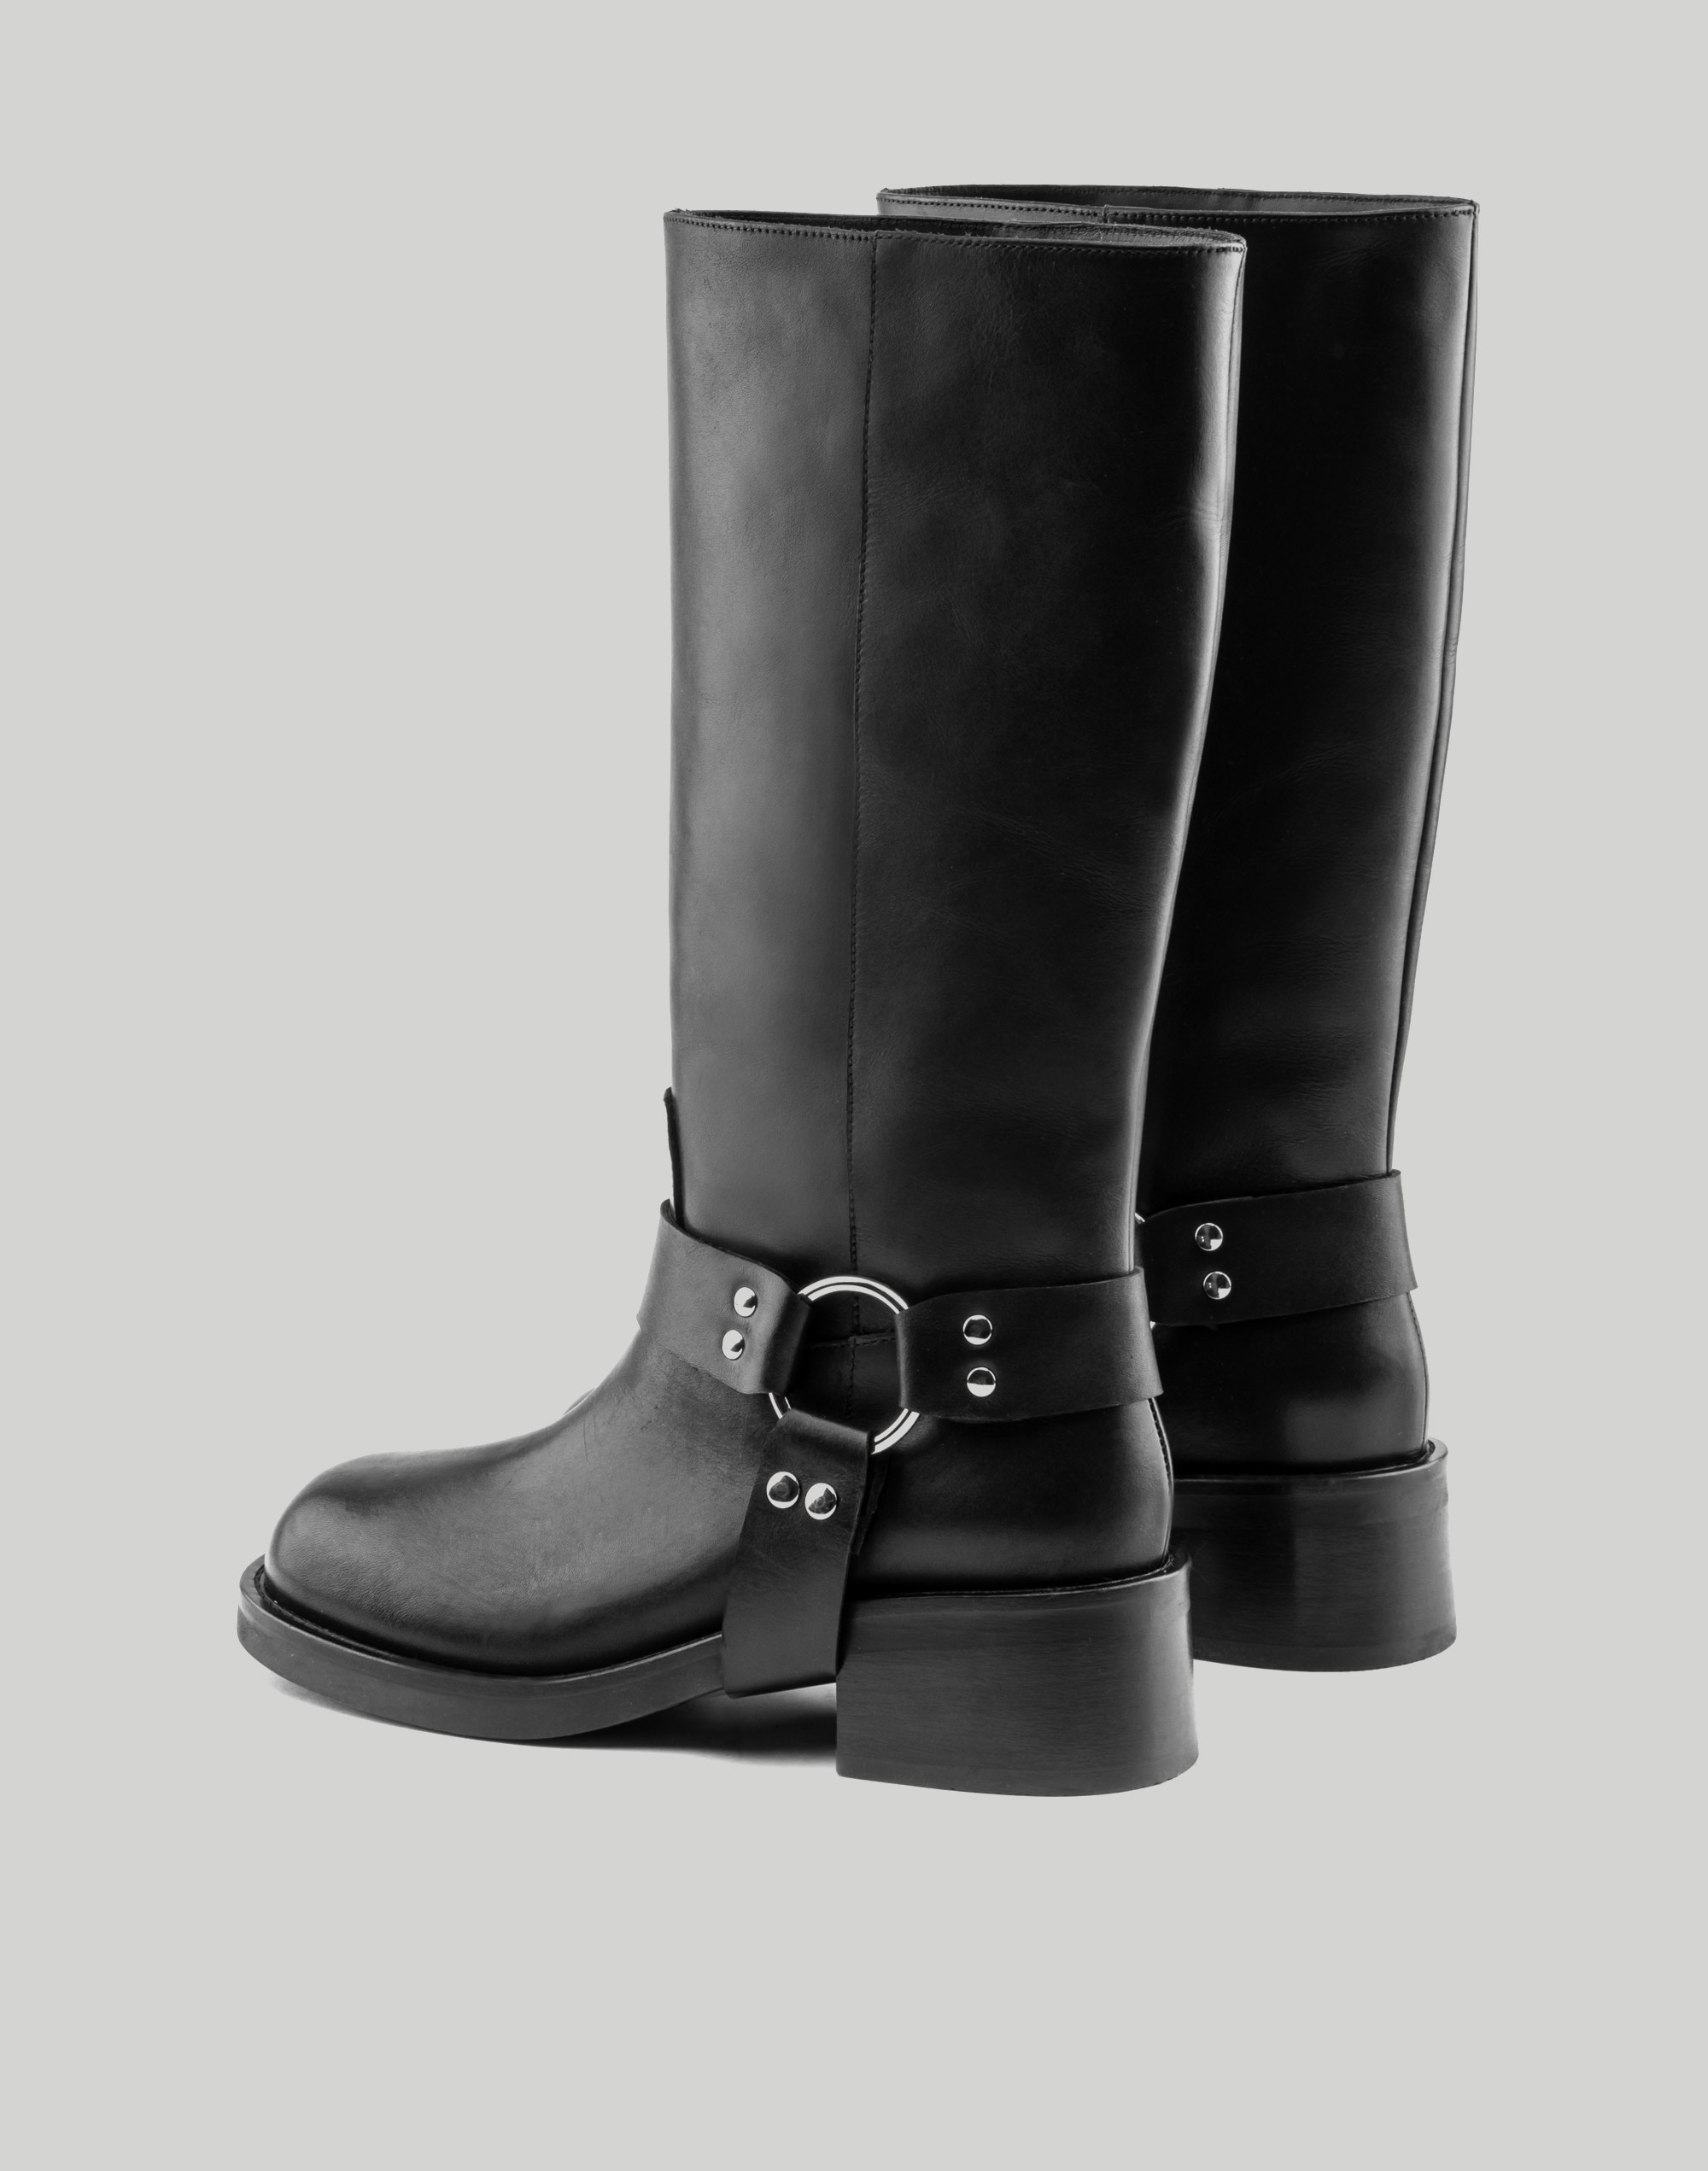 Maguire Lucca Black Boot